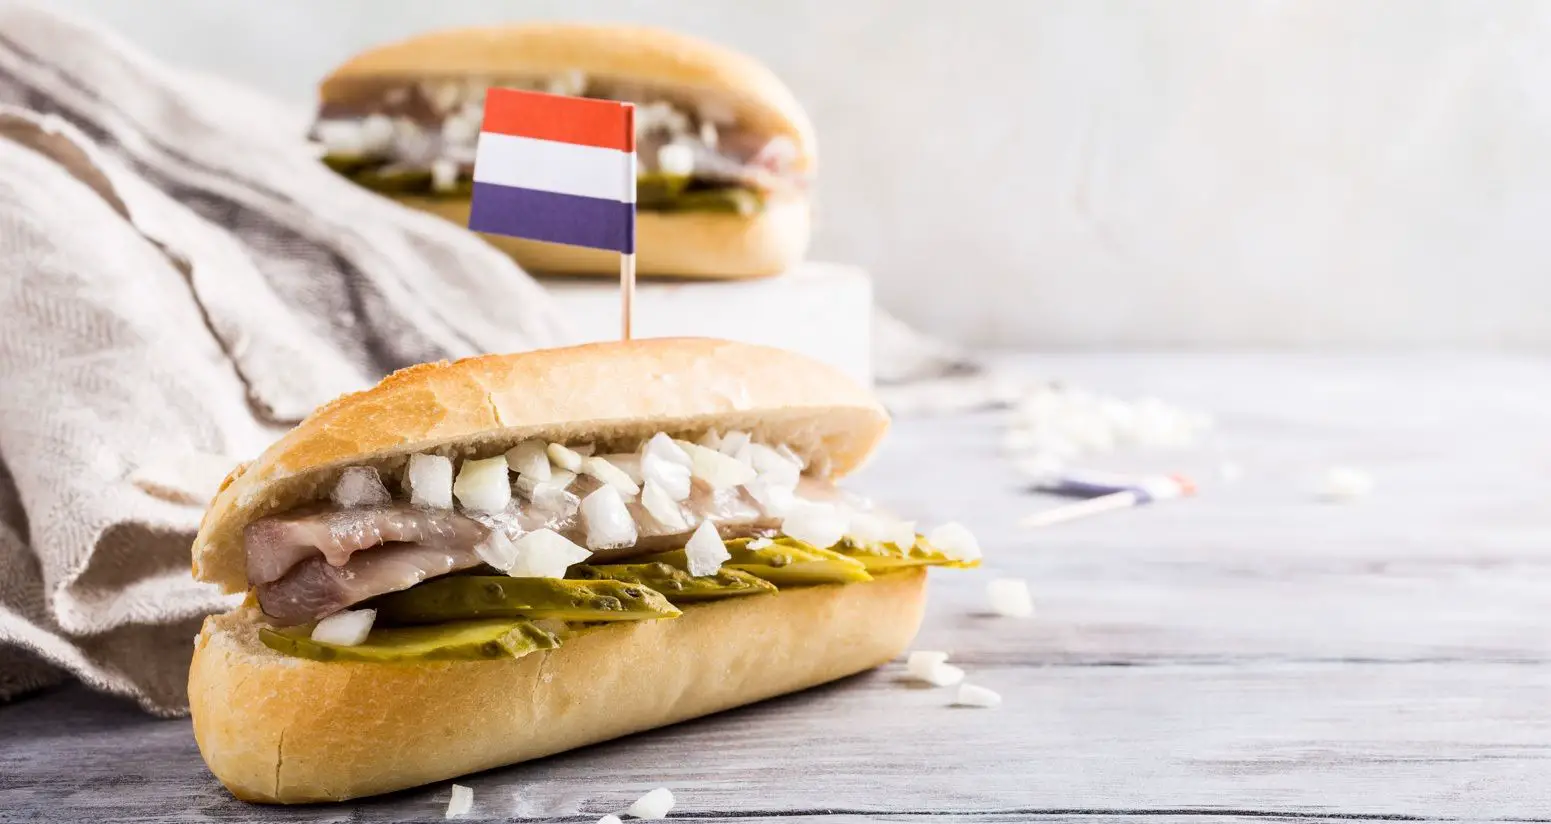 Tourist's guide to Dutch cuisine - what to eat when in Netherlands